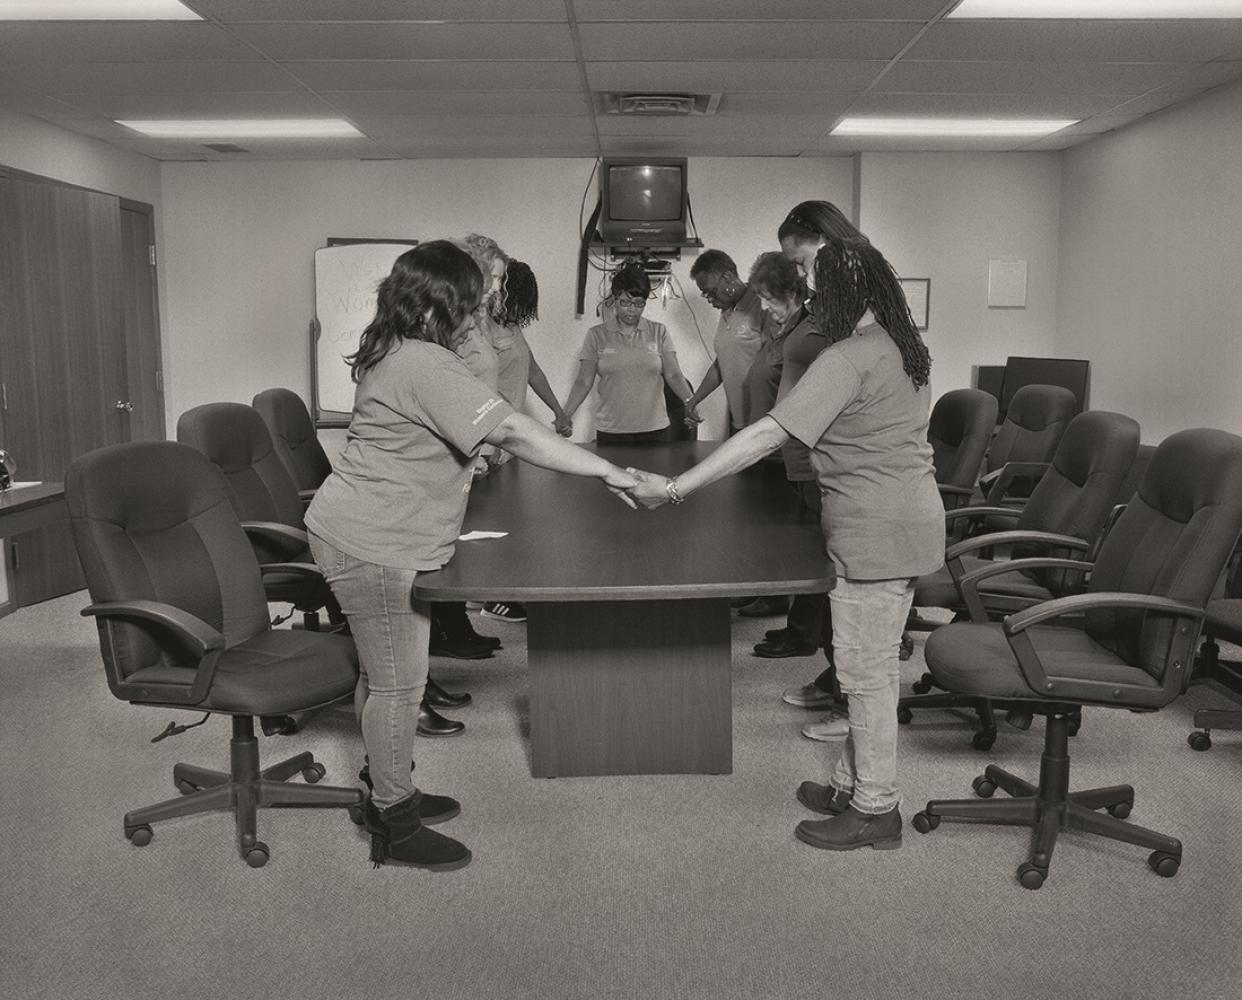 Women’s Committee final gathering inside their conference room at UAW Local 1112 Reuther Scandy Alli union hall 